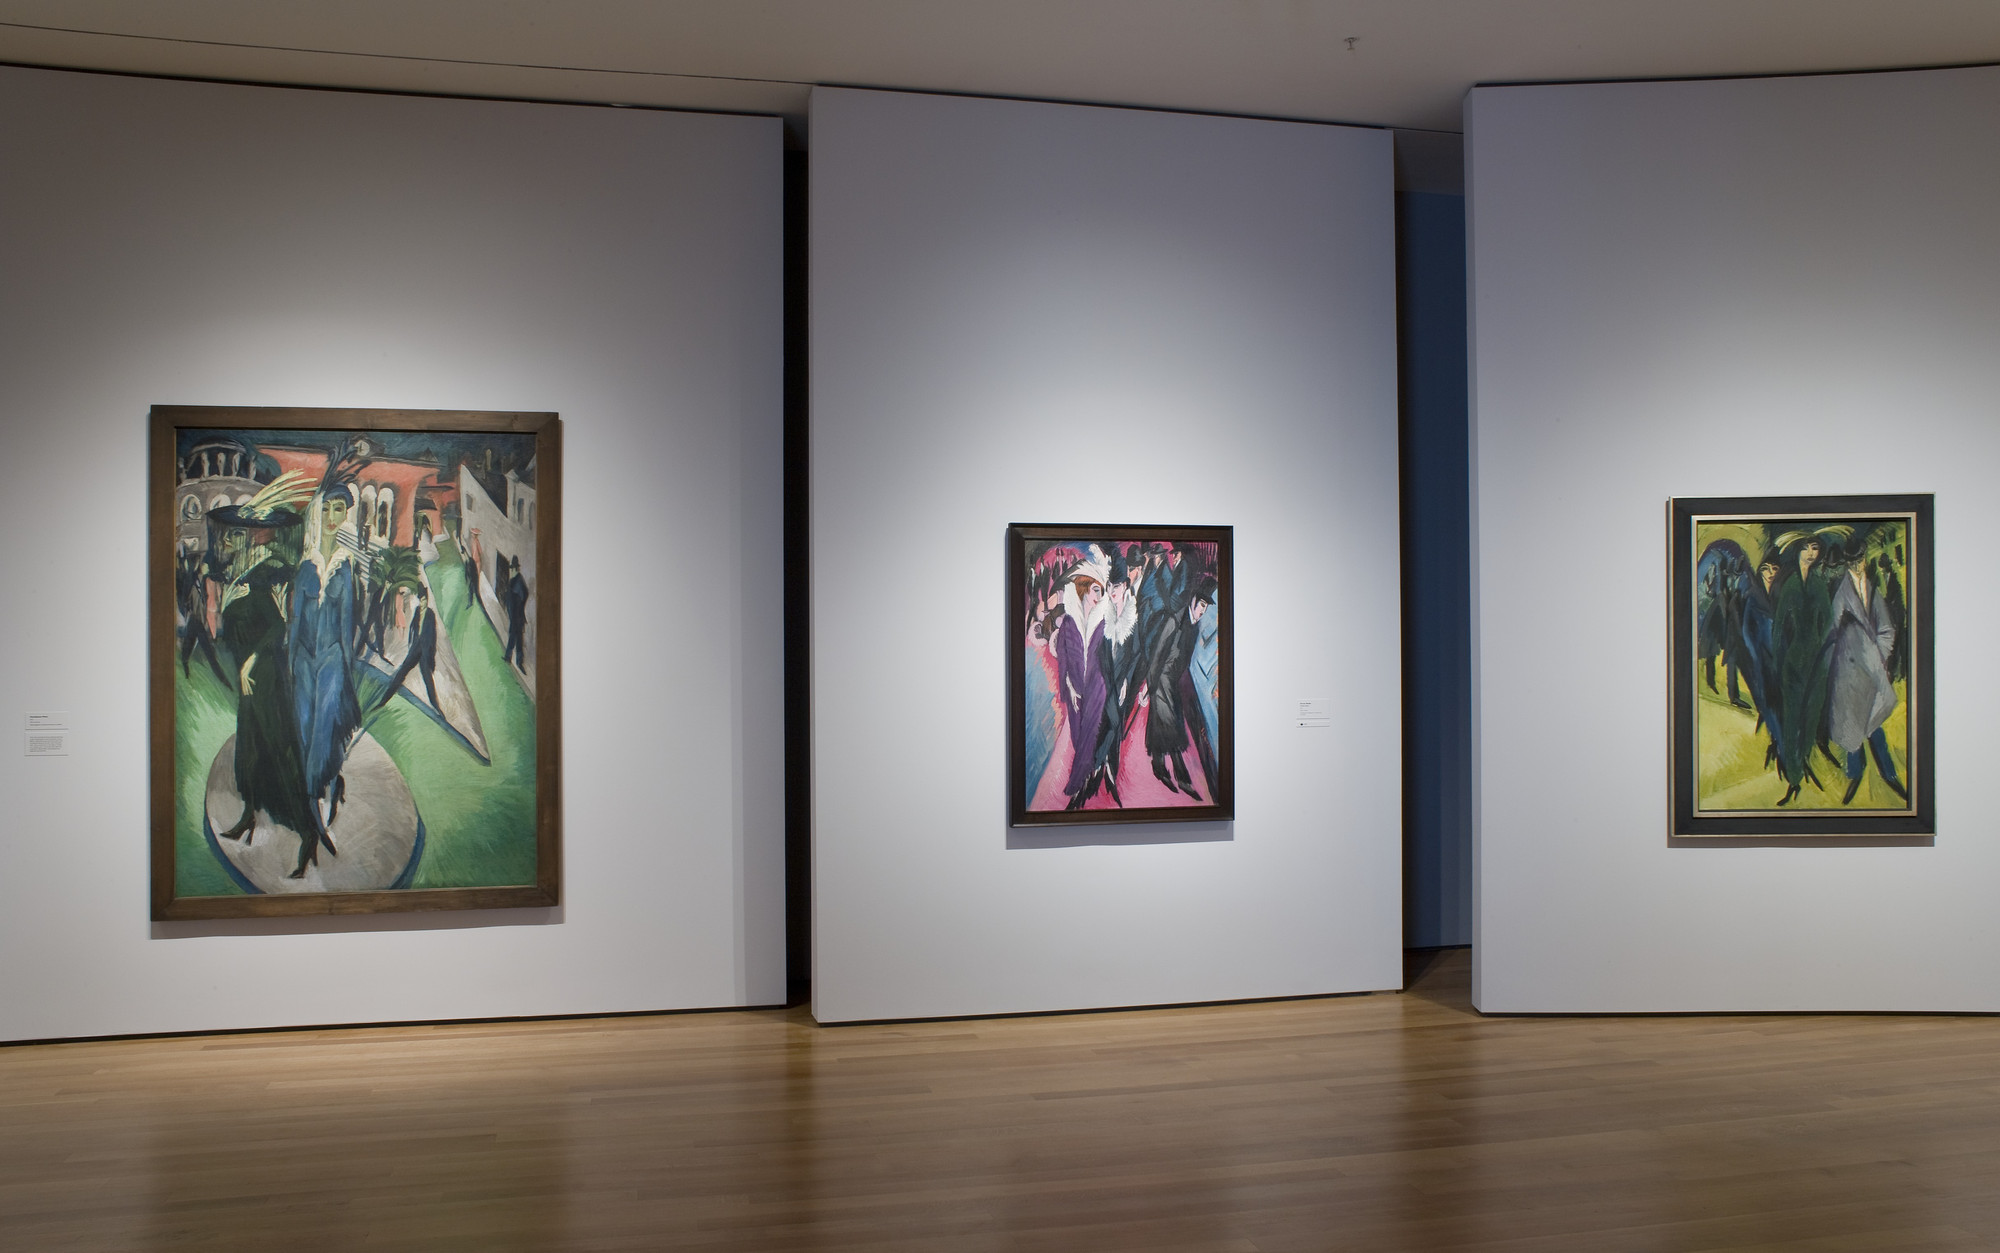 Installation view of the exhibition, "Kirchner and the Berlin 1913-15" MoMA